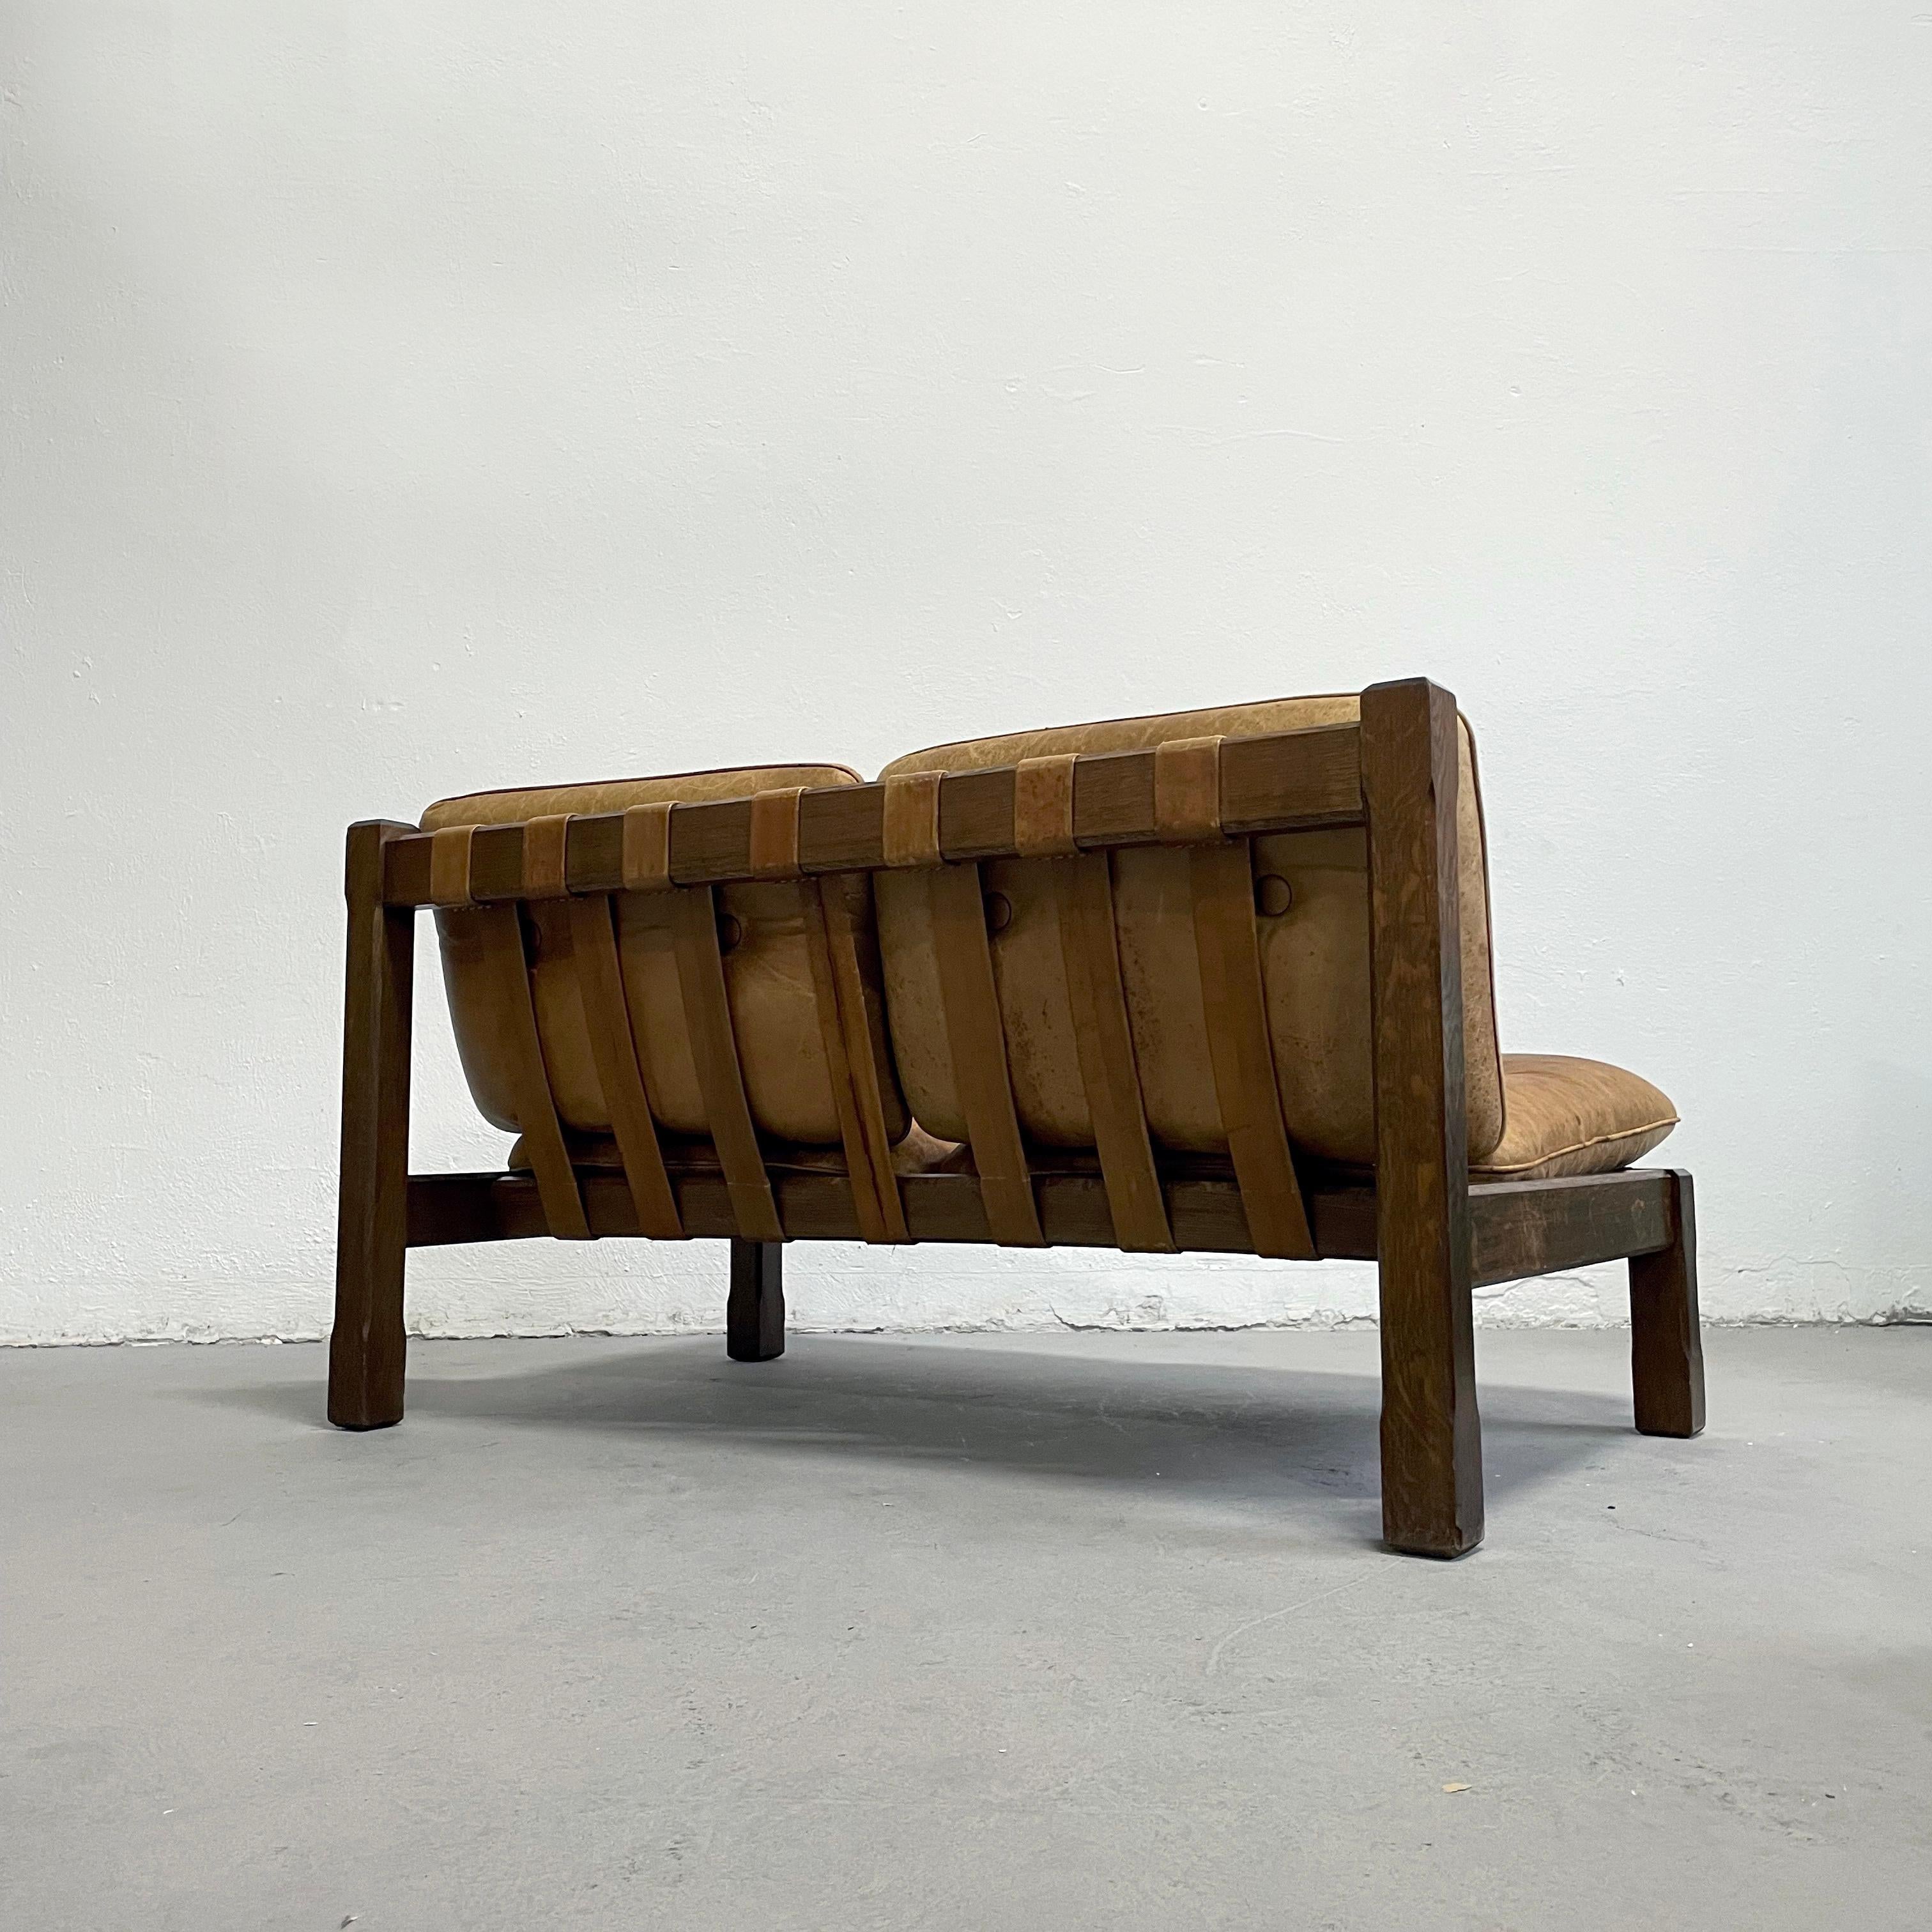 European Mid Century Brutalist Sofa in Solid Oak and Leather, 1960s